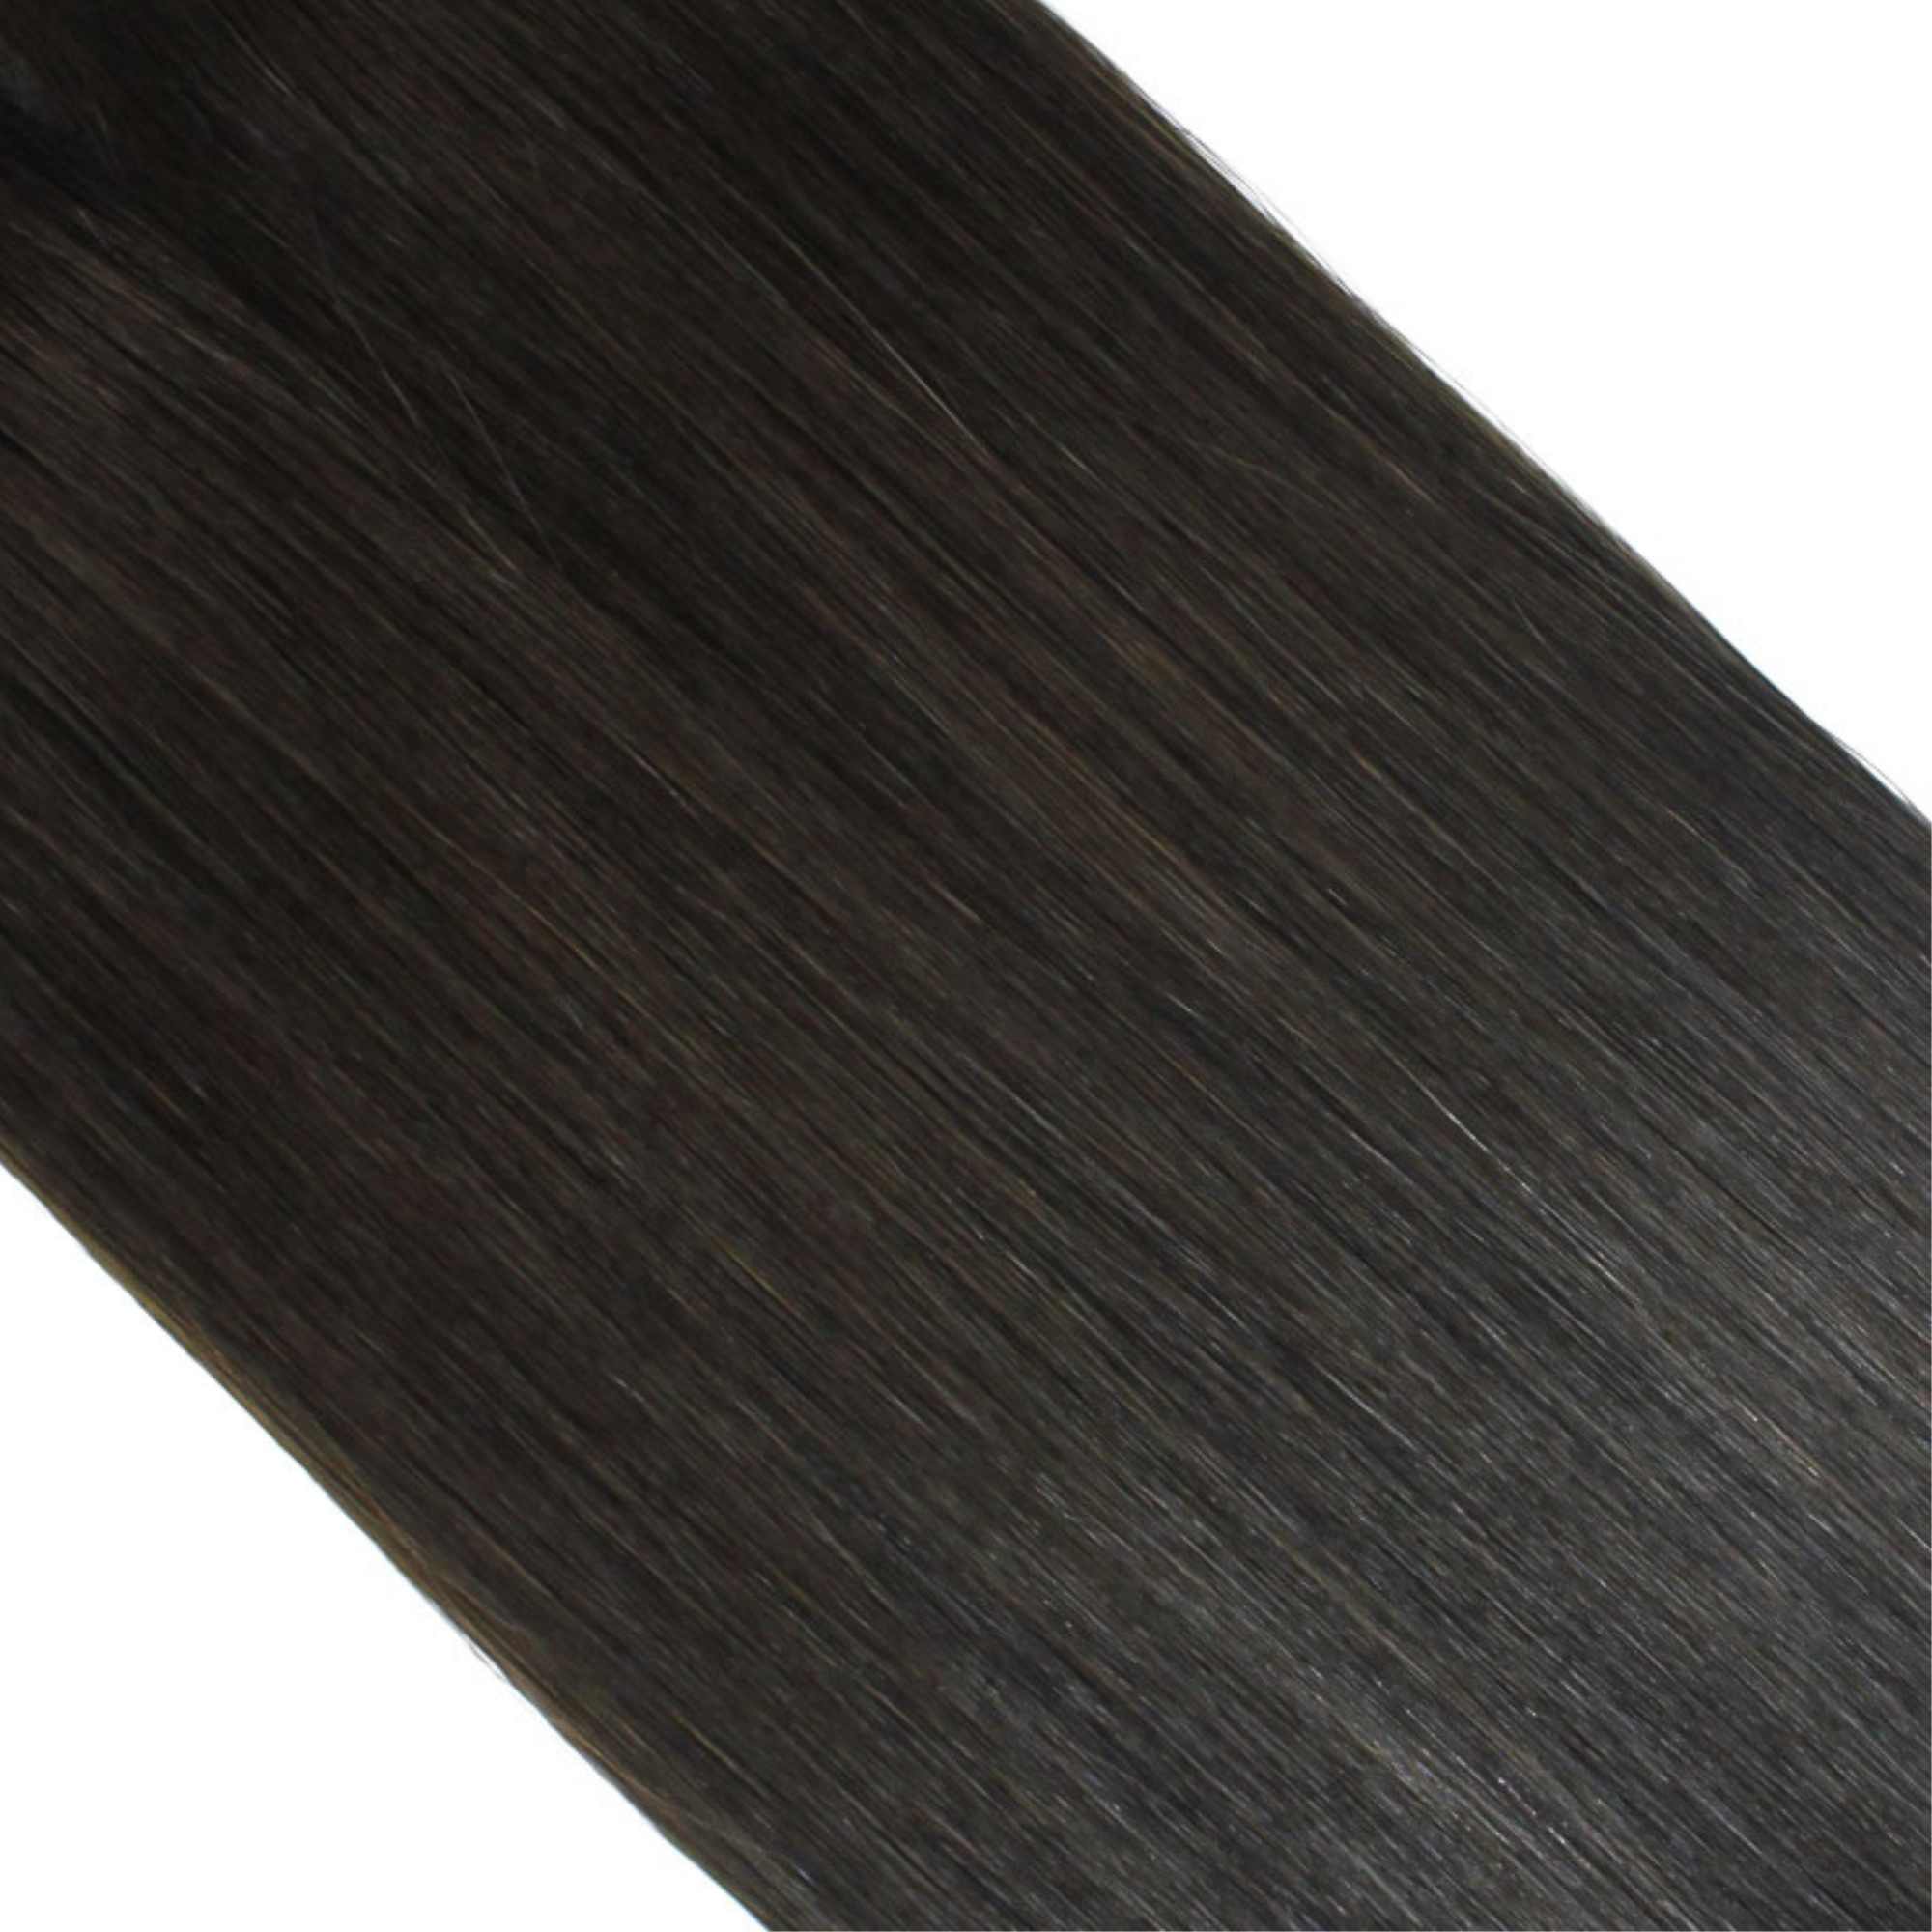 "hair rehab london 18" tape hair extensions shade swatch titled show stopper"